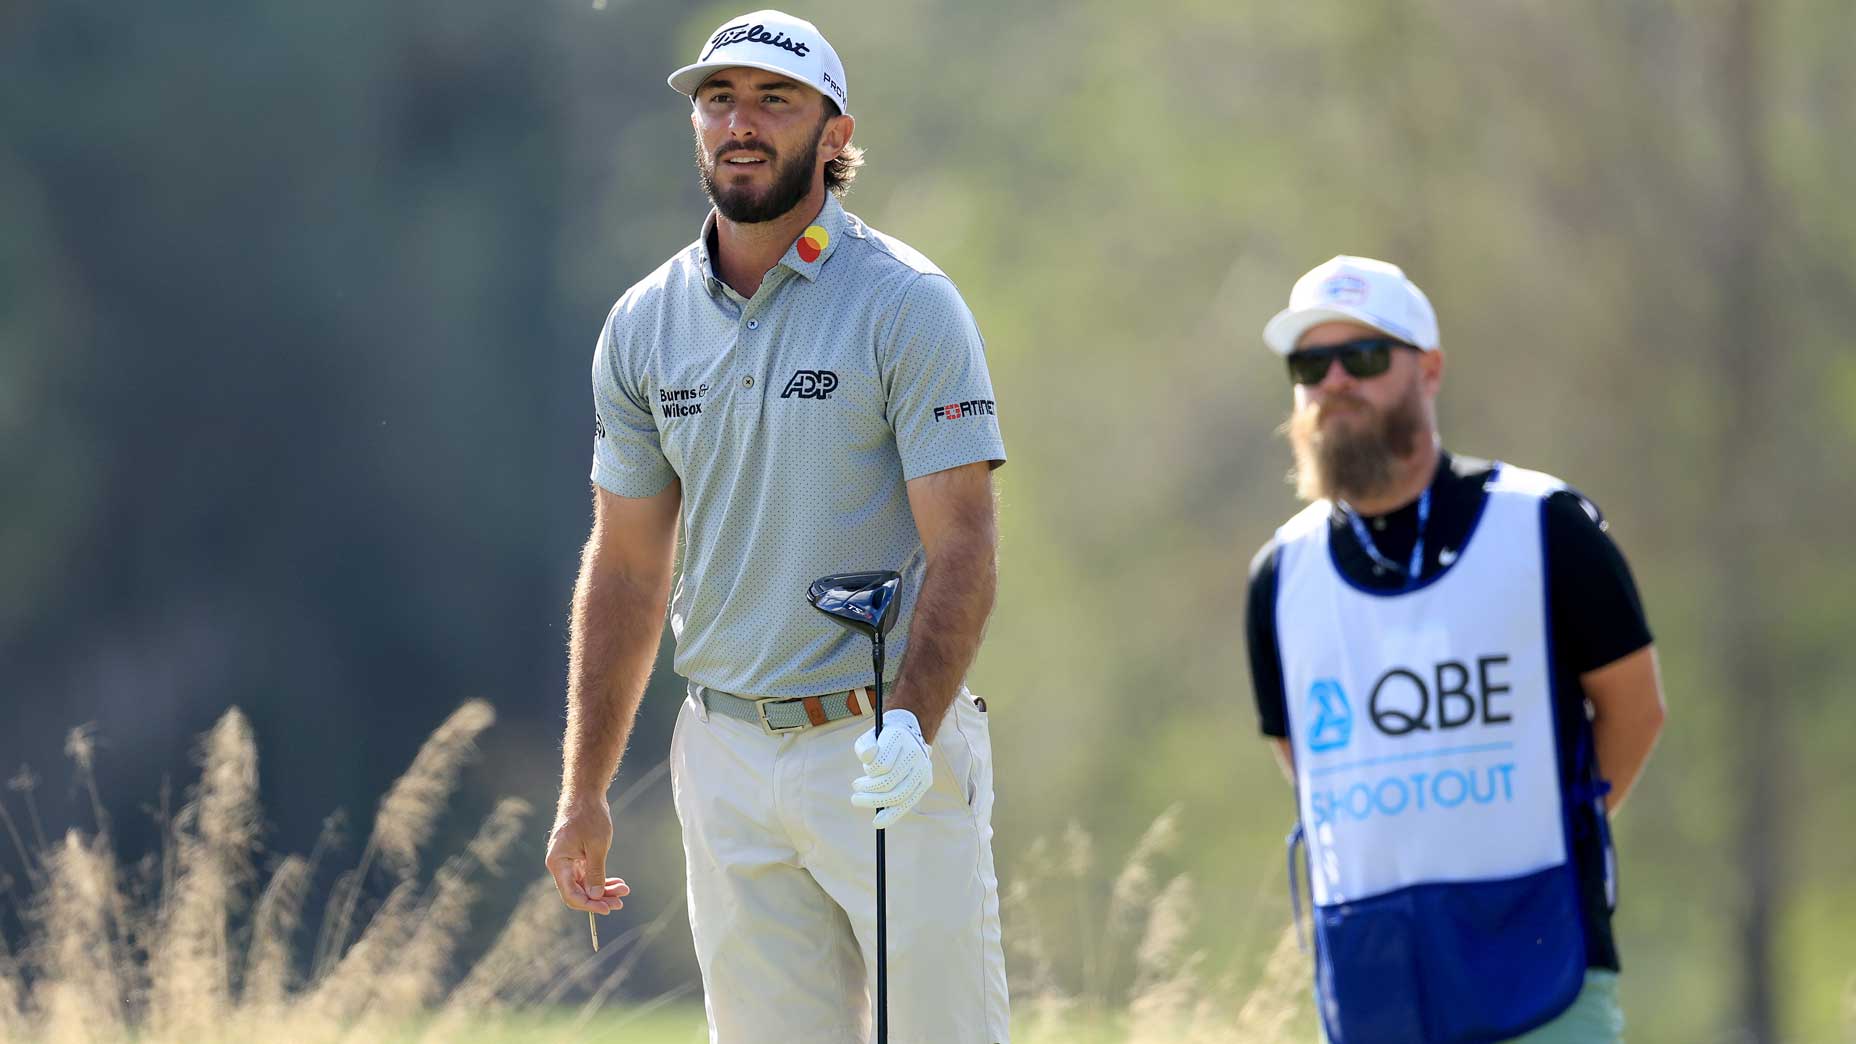 How to watch the 2022 QBE Shootout on Saturday Round 2 live